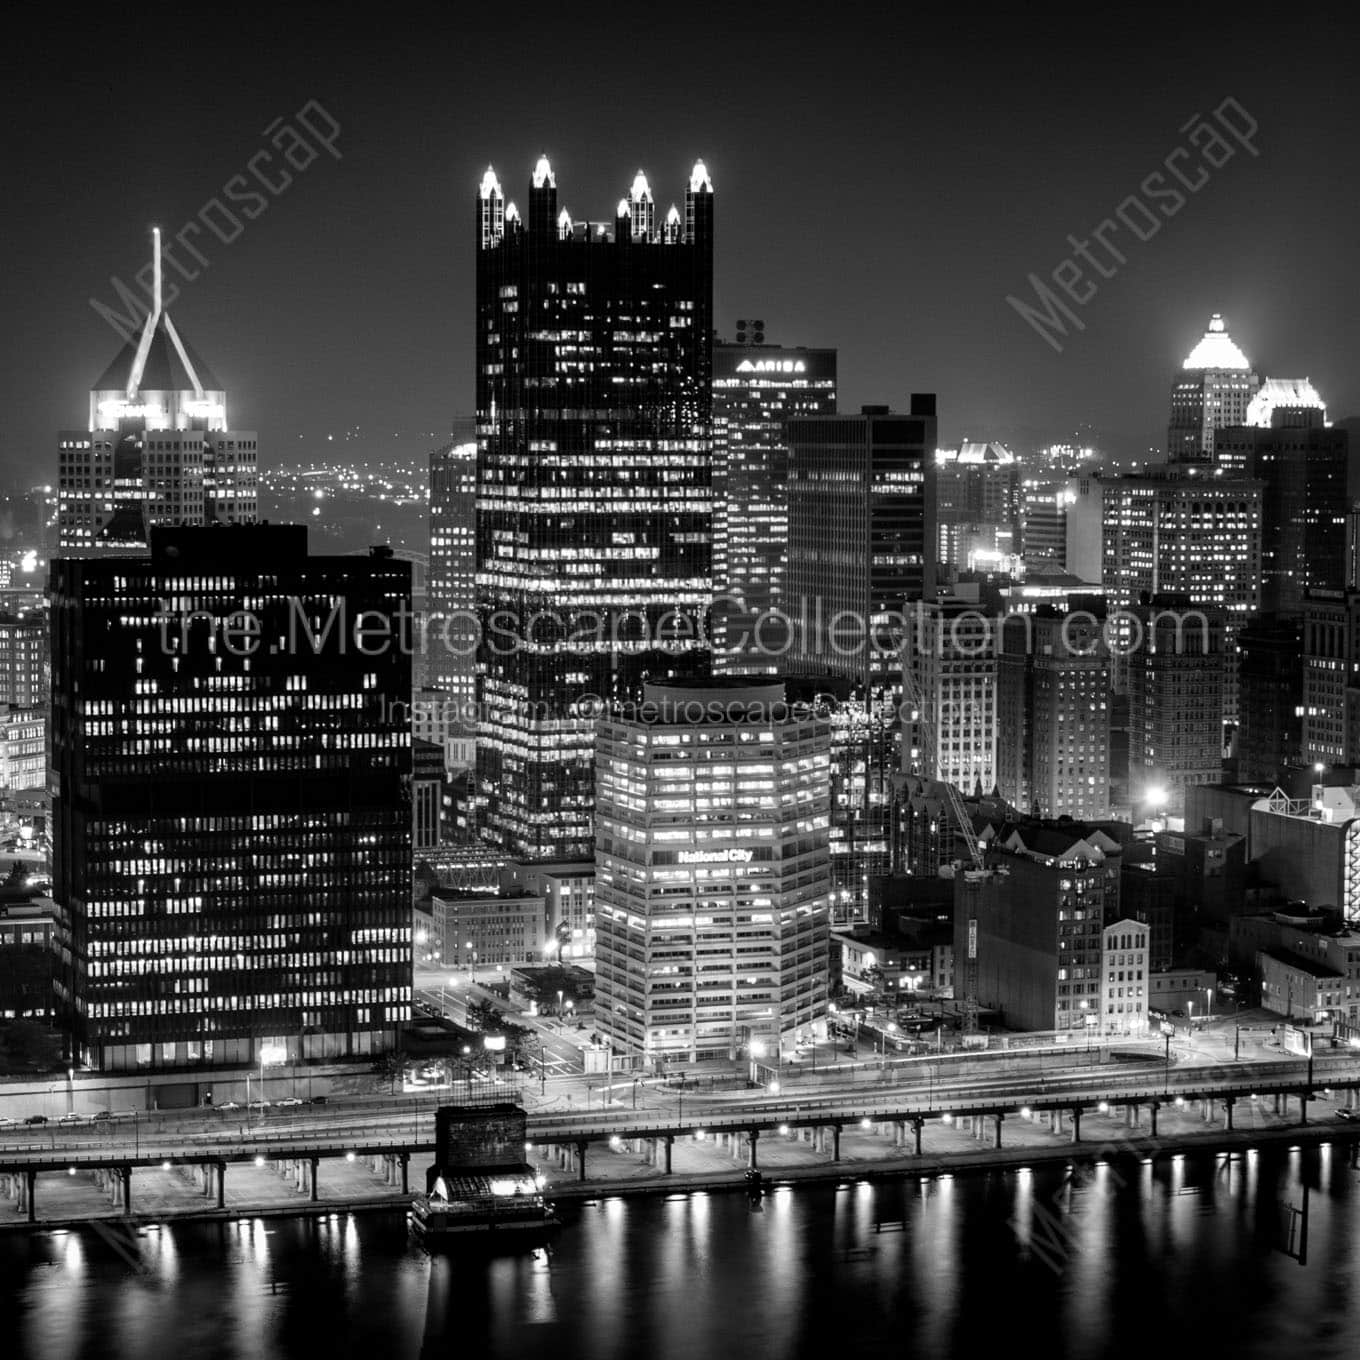 ppg building pittsburgh skyline at night Black & White Office Art